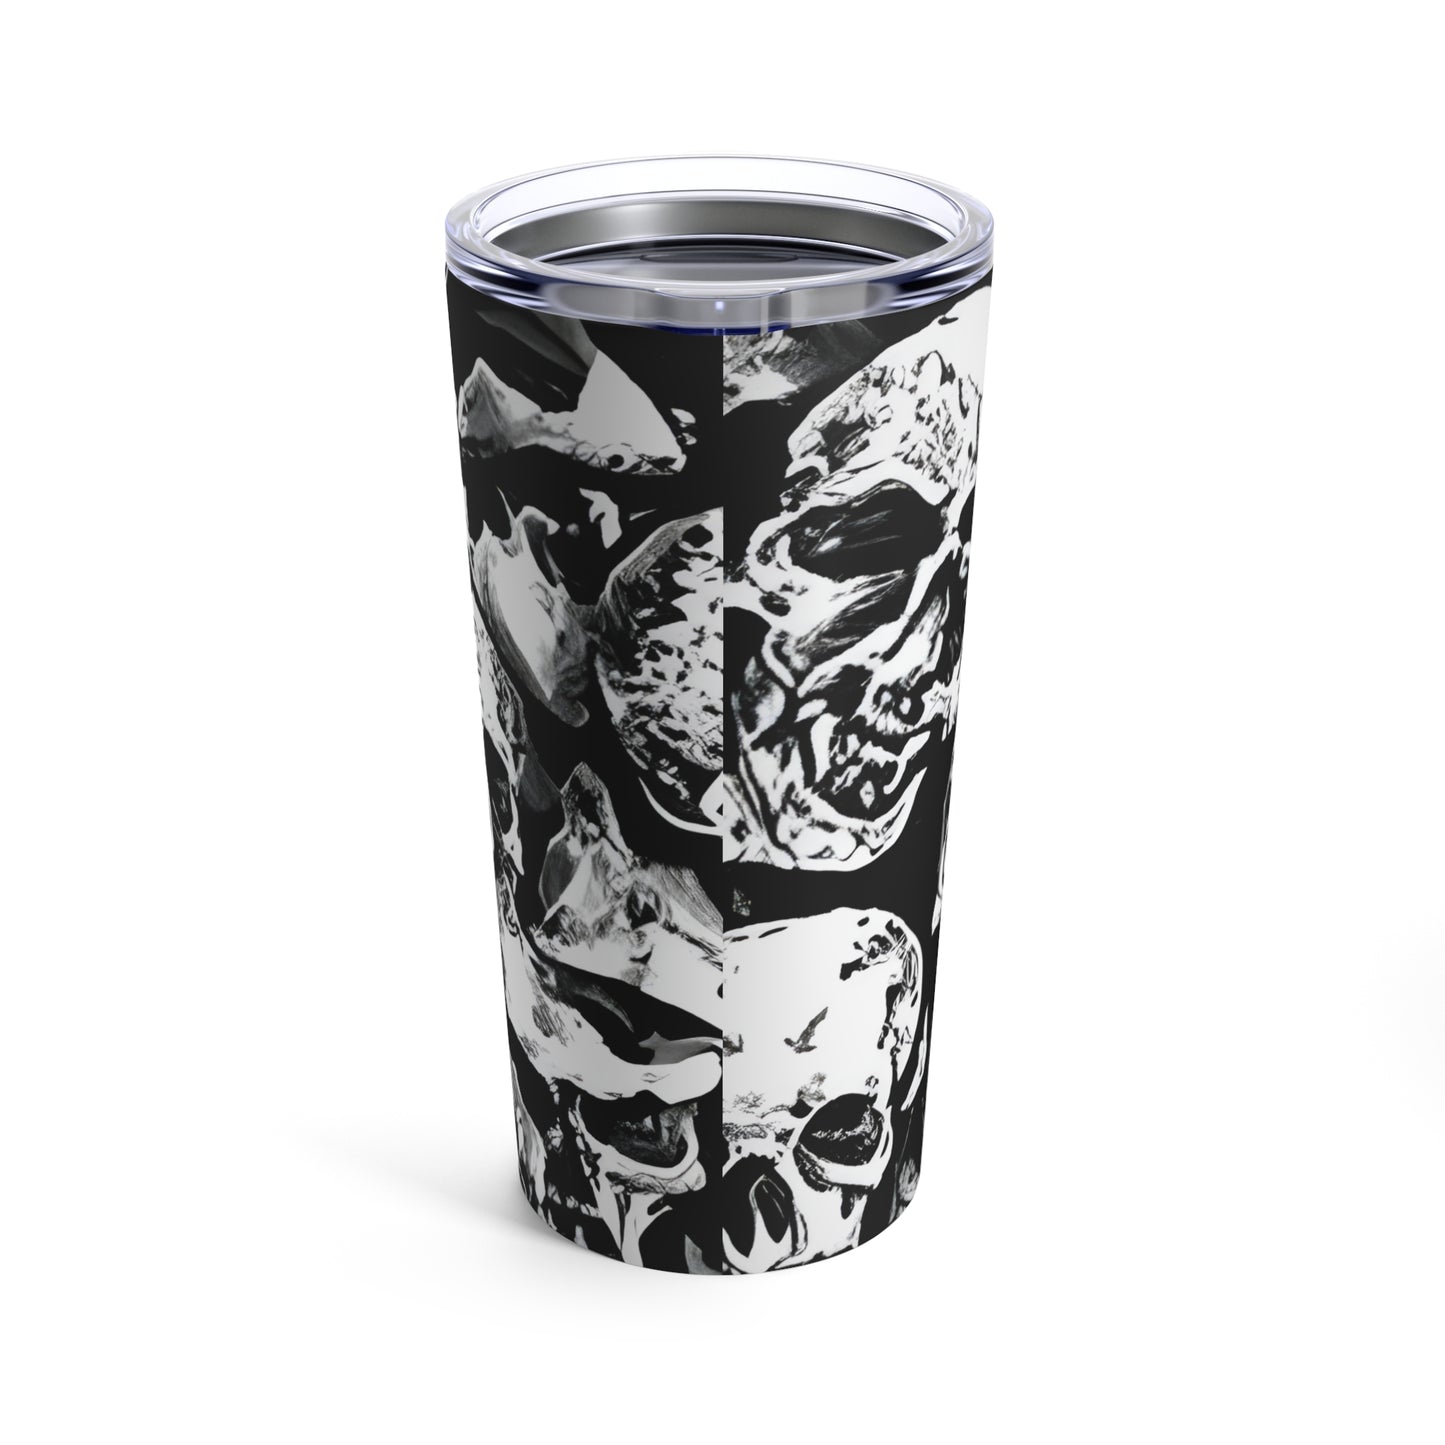 Skull Pile Tumbler 20oz Stainless Steel, Plastic and Rubber Lid, Glossy Finish